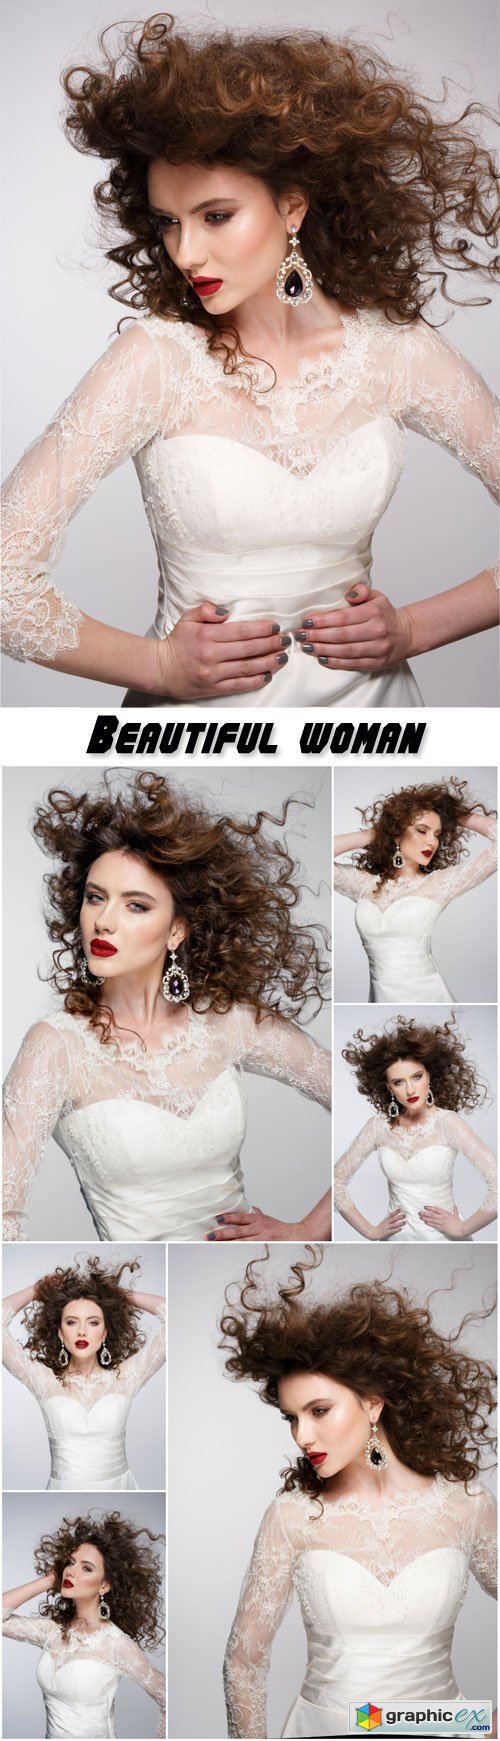 Beautiful woman with long brown hair, red lips, jewellery in wedding dress